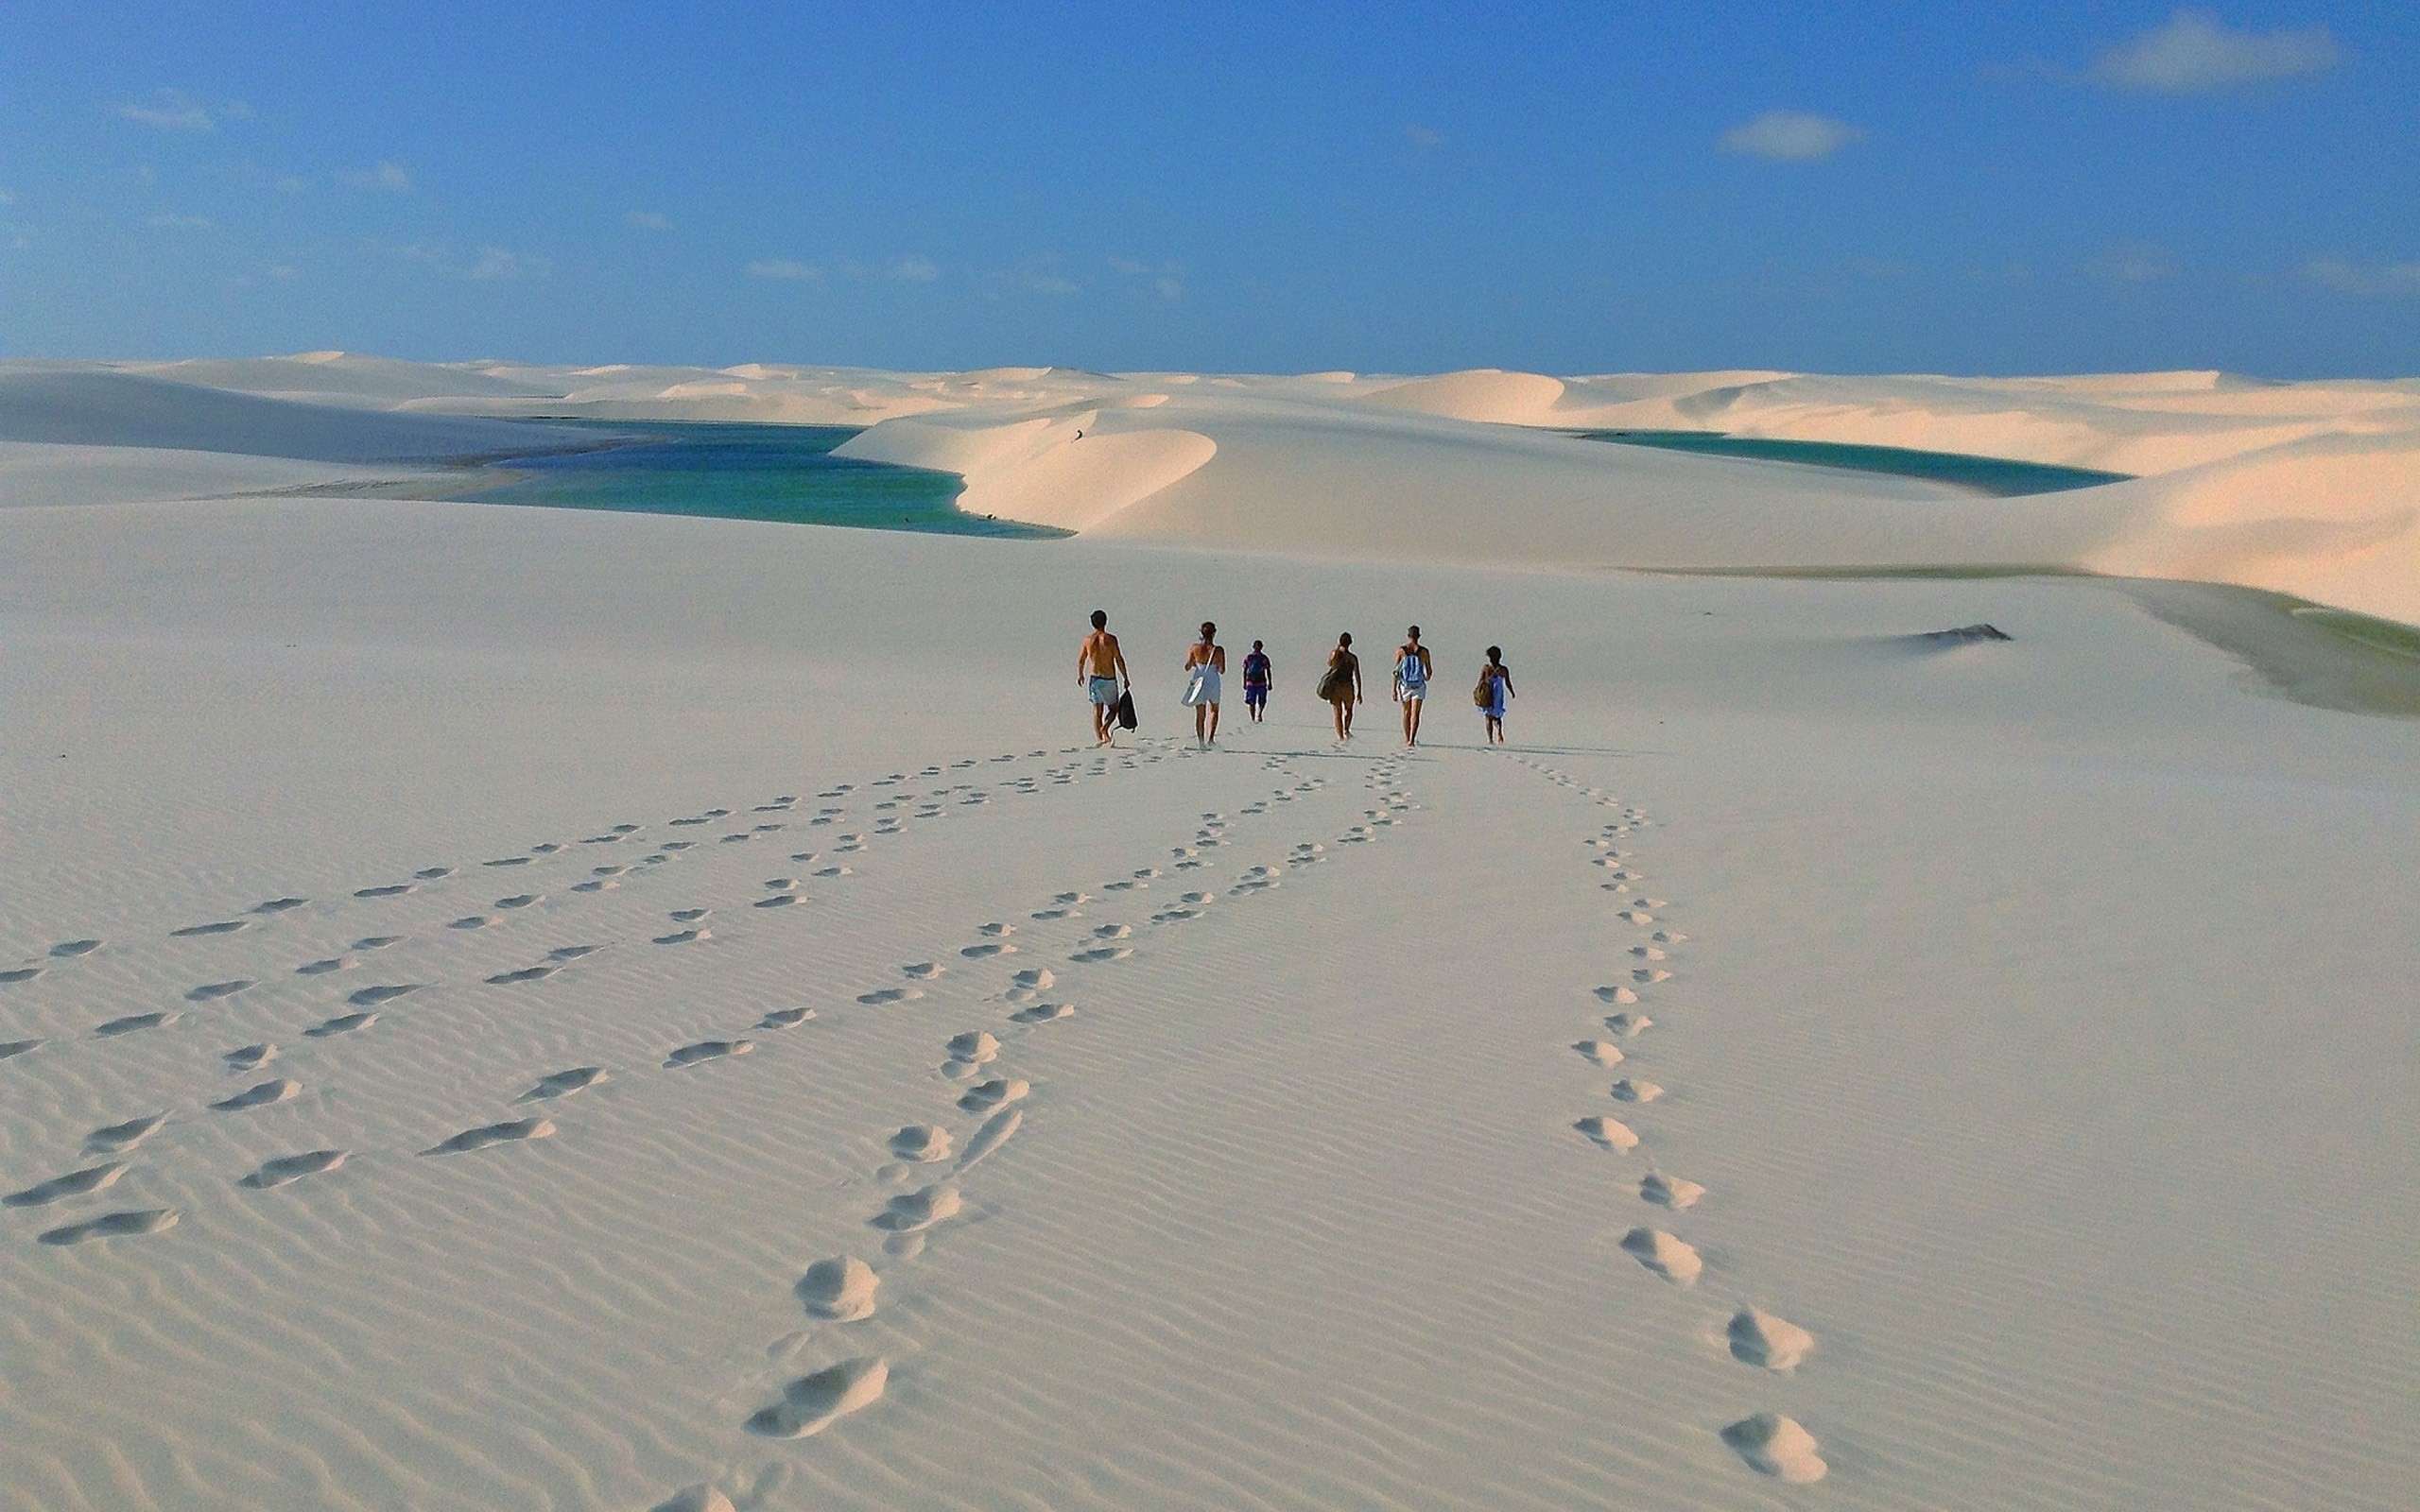 Footprints in the sand in Brazil wallpapers and images   wallpapers